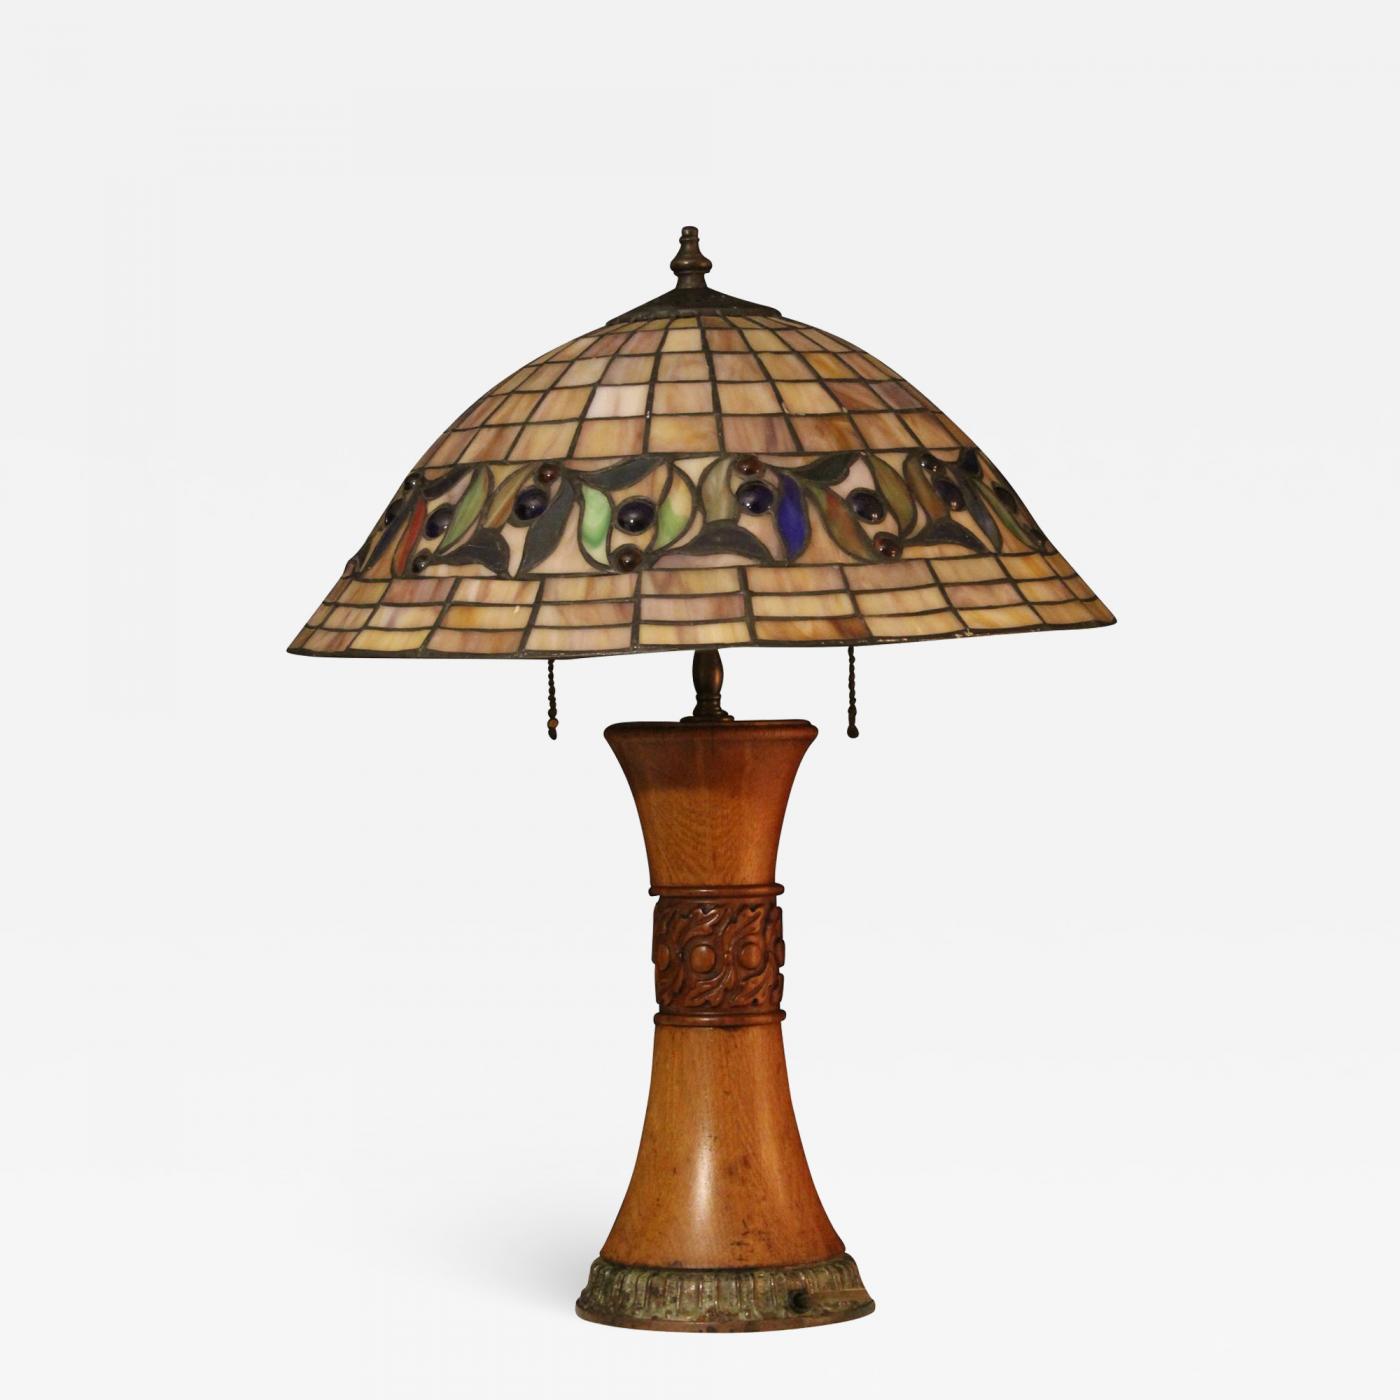 1930s Arts And Crafts Style Table Lamp, 1930 8217 S Art Deco Table Lamps